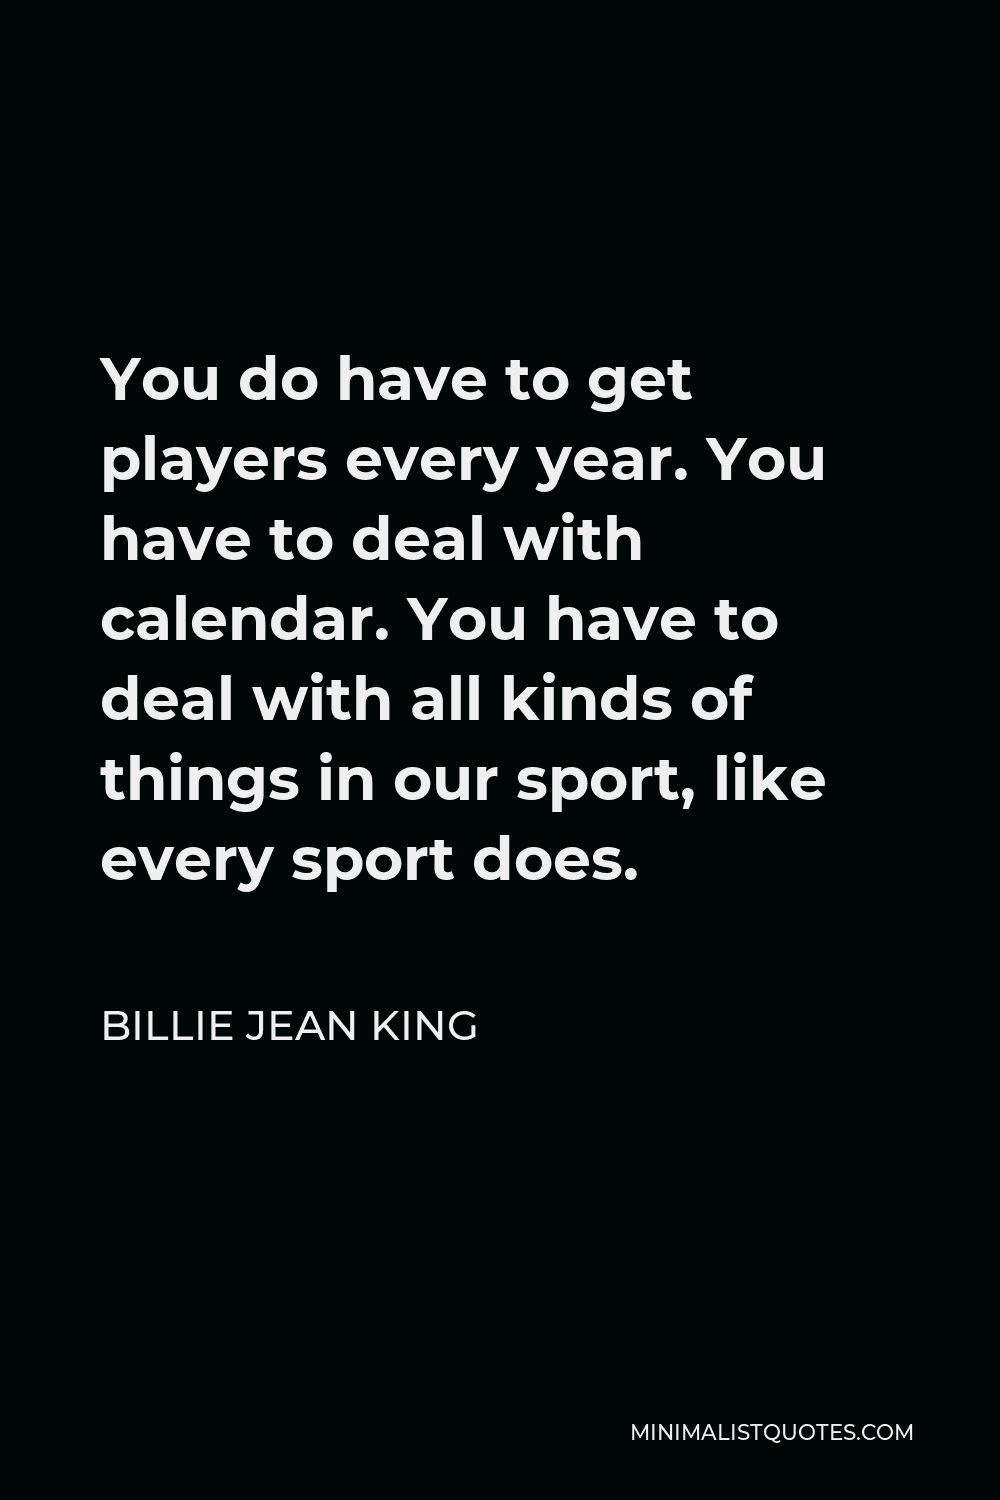 Billie Jean King Quote - You do have to get players every year. You have to deal with calendar. You have to deal with all kinds of things in our sport, like every sport does.